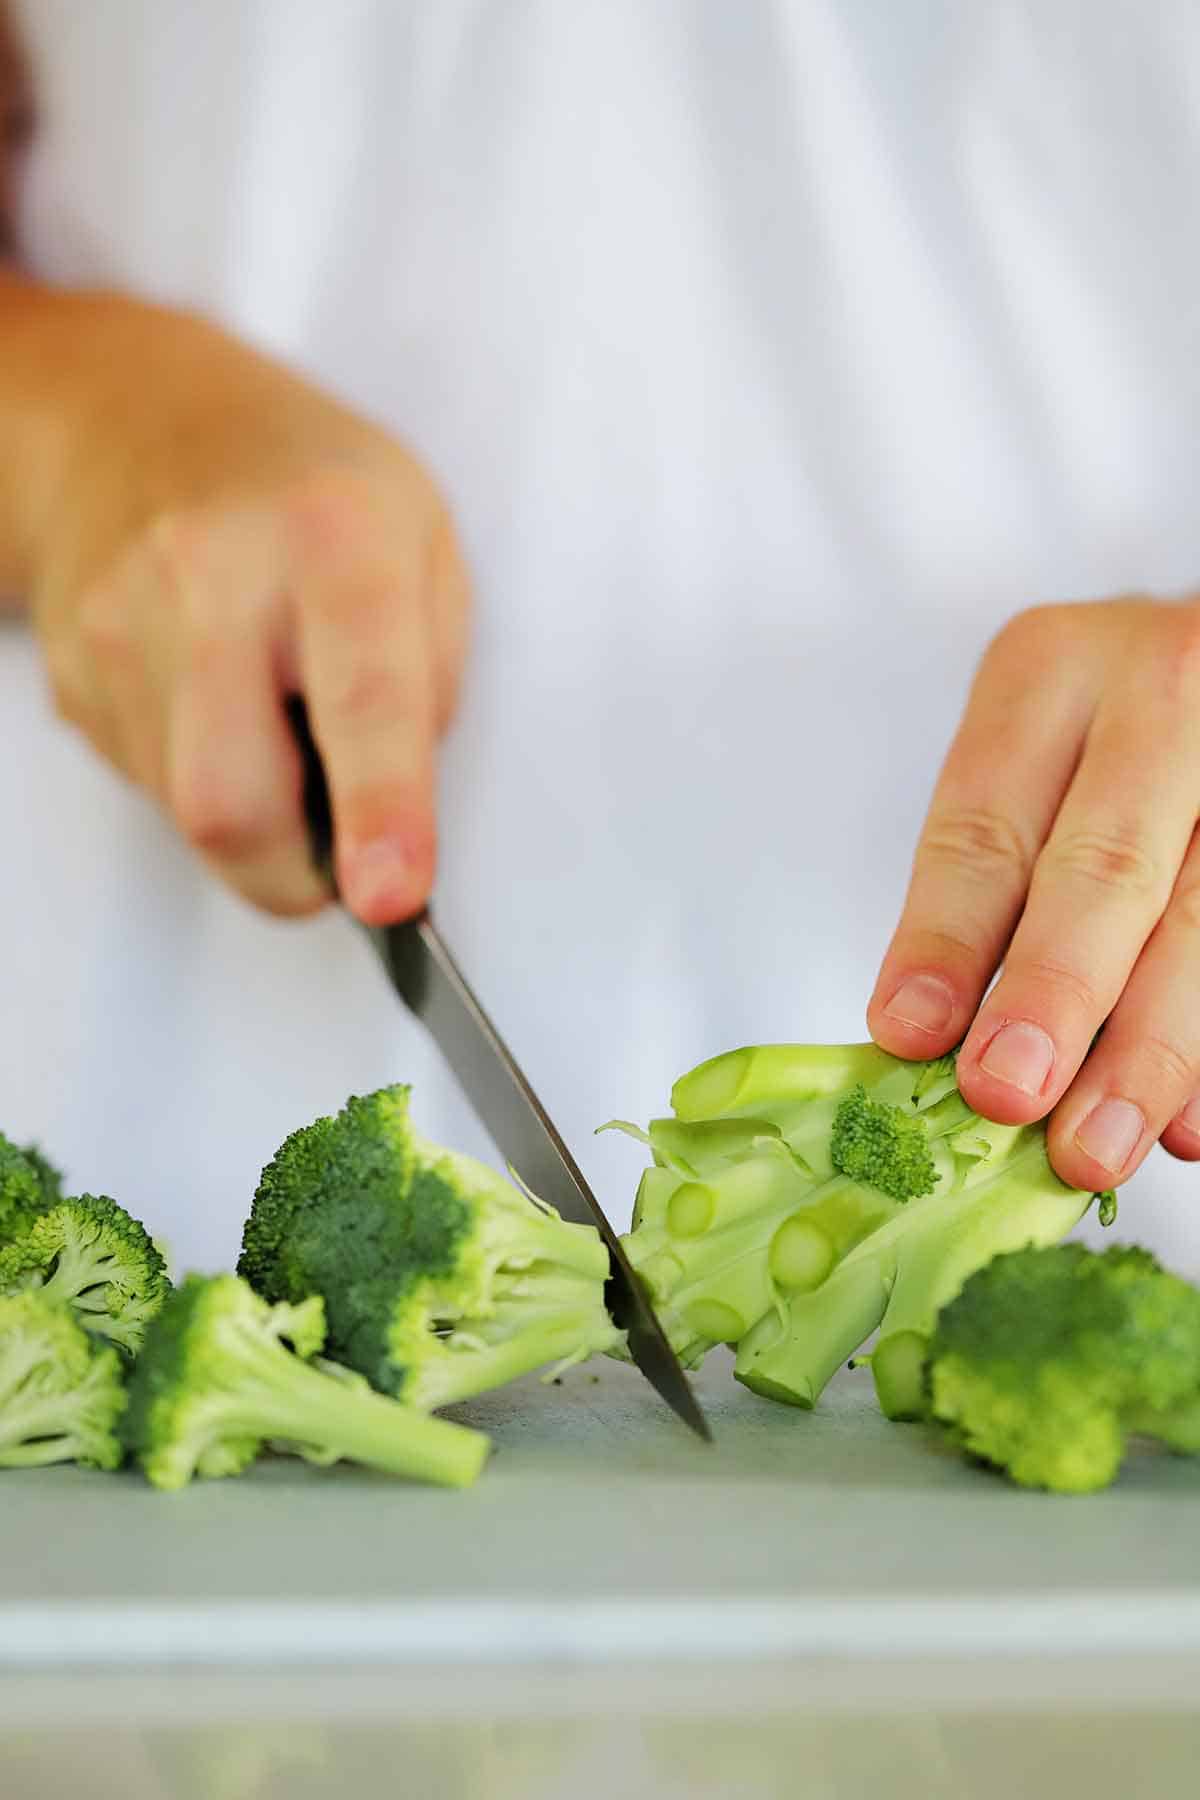 Cutting the center floret off a head of broccoli.